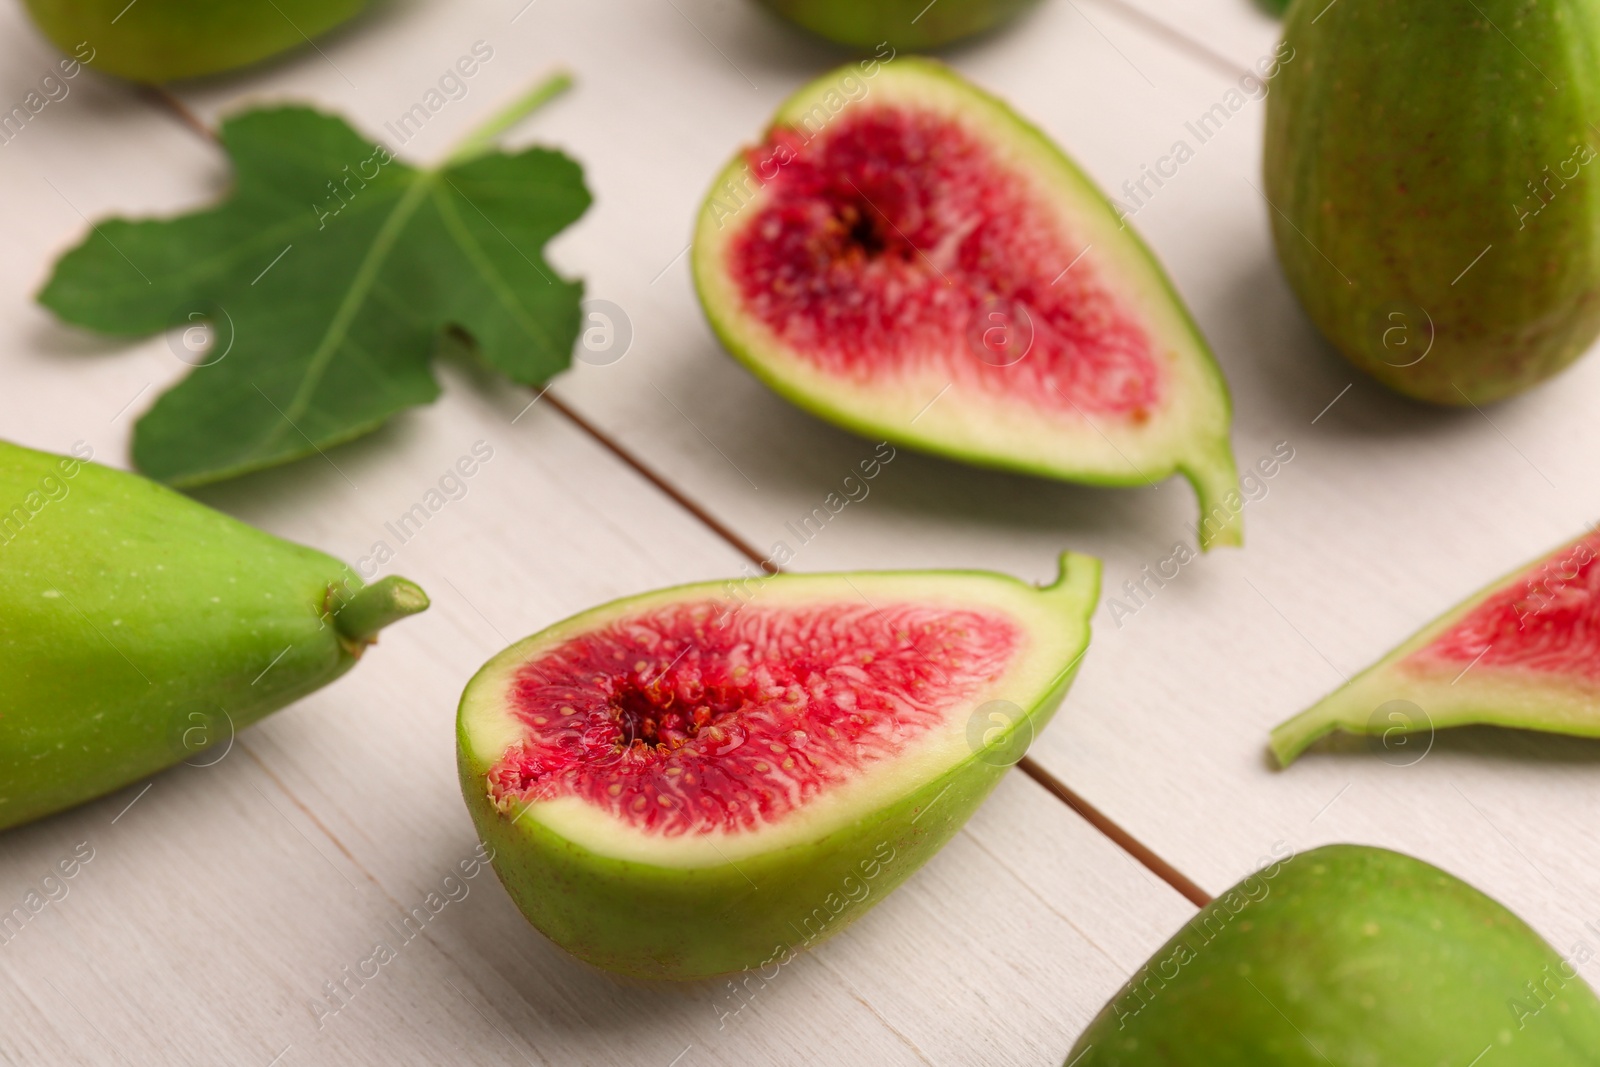 Photo of Cut and whole green figs on white wooden table, closeup